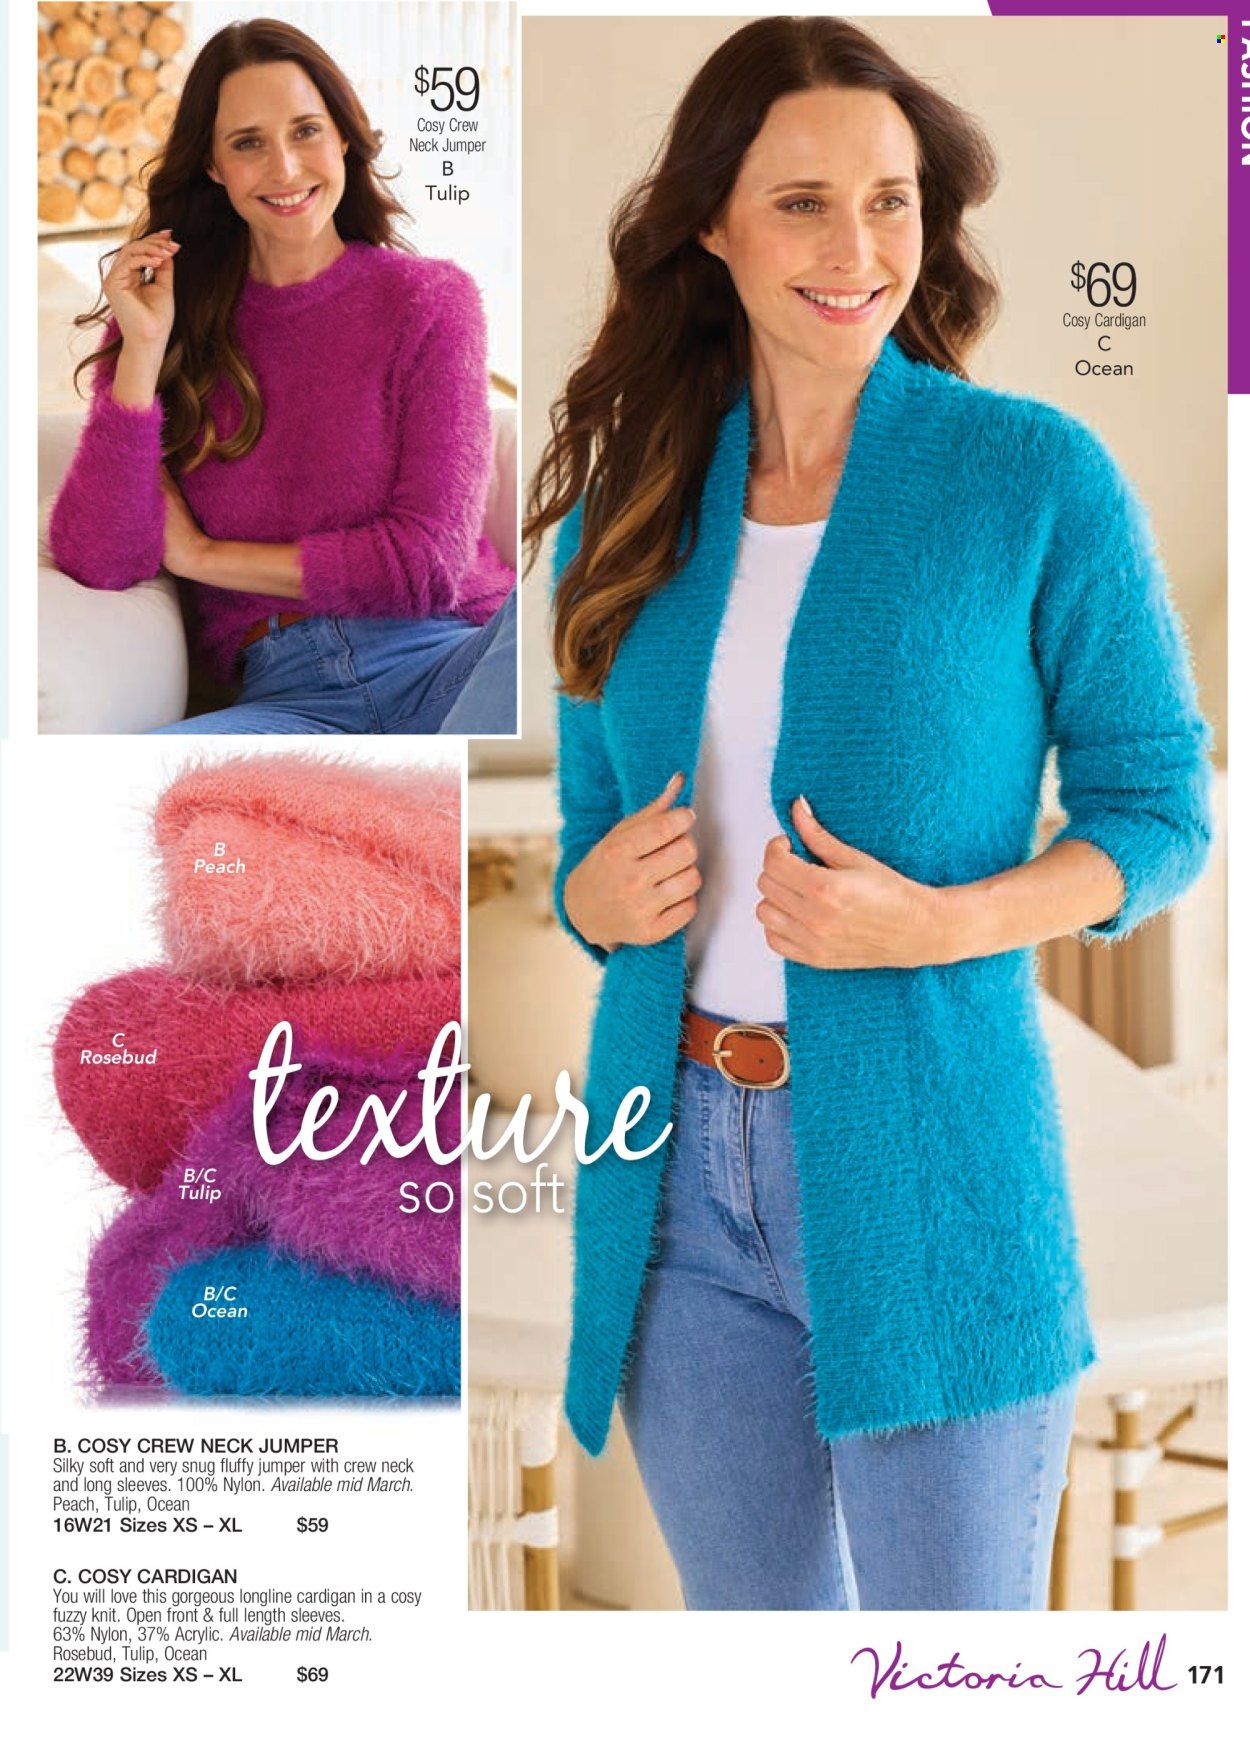 thumbnail - Innovations Catalogue - Sales products - cardigan, sweater, Snug. Page 171.